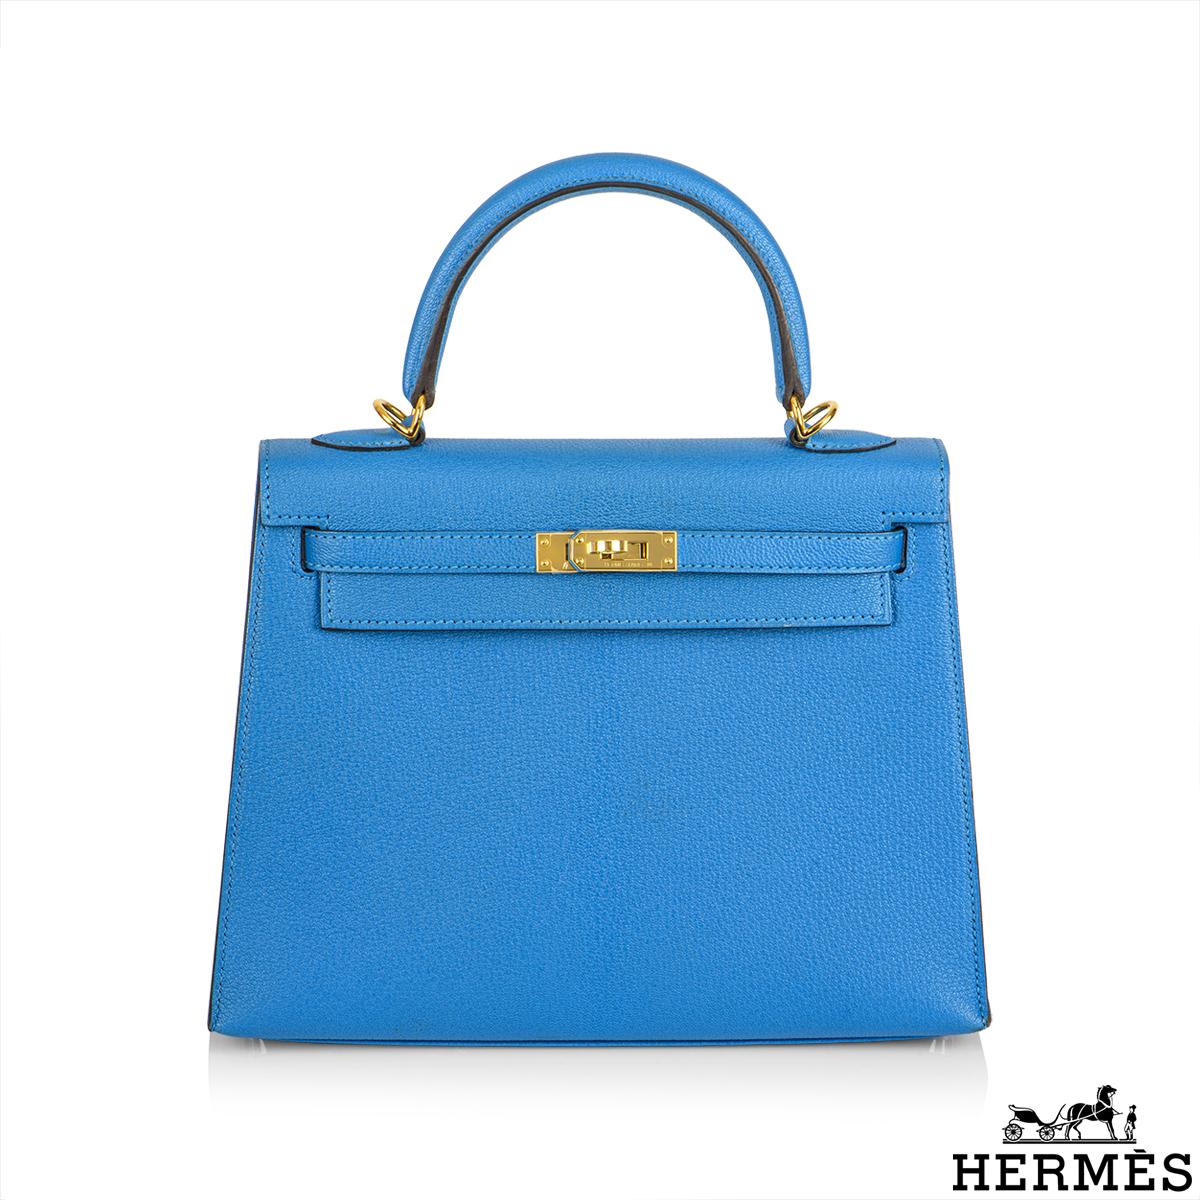 A gorgeous Hermès Kelly 25cm Bleu Zanzibar Handbag. The exterior of this Kelly features a vivid Bleu Zanzibar Chevre Mysore leather with tonal stitching. It features gold tone hardware with front toggle closure, a rolled top handle with a detachable